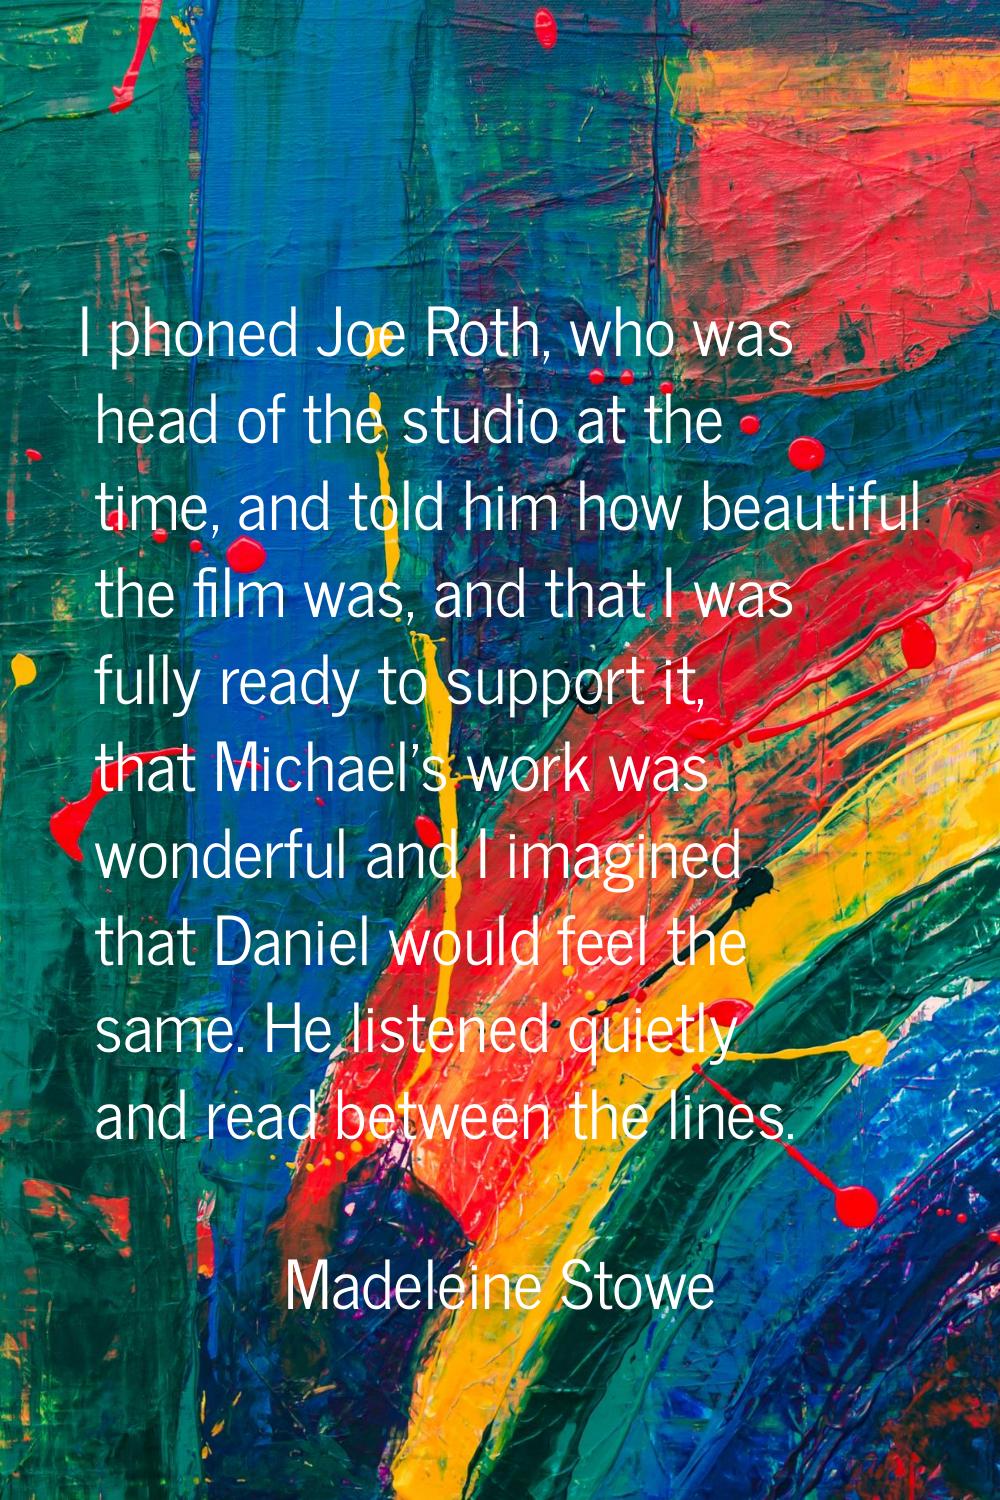 I phoned Joe Roth, who was head of the studio at the time, and told him how beautiful the film was,